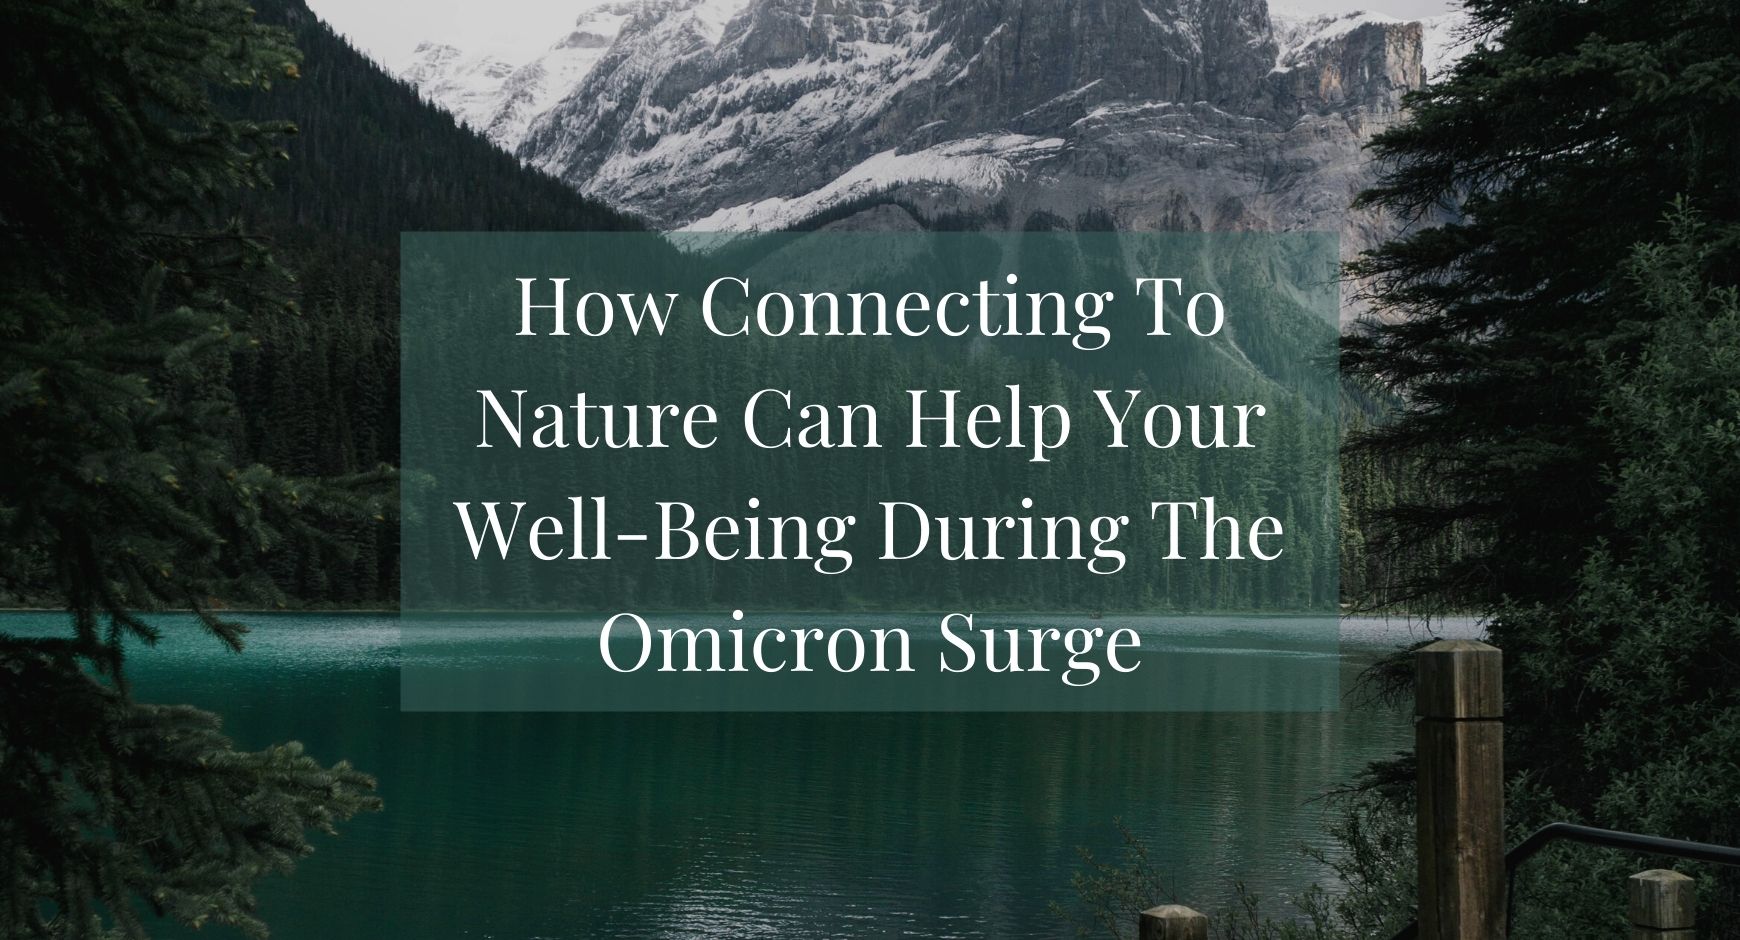 A lake surrounded by trees under words that read " Nature Can Help Your Well-Being During The Omicron Surge"